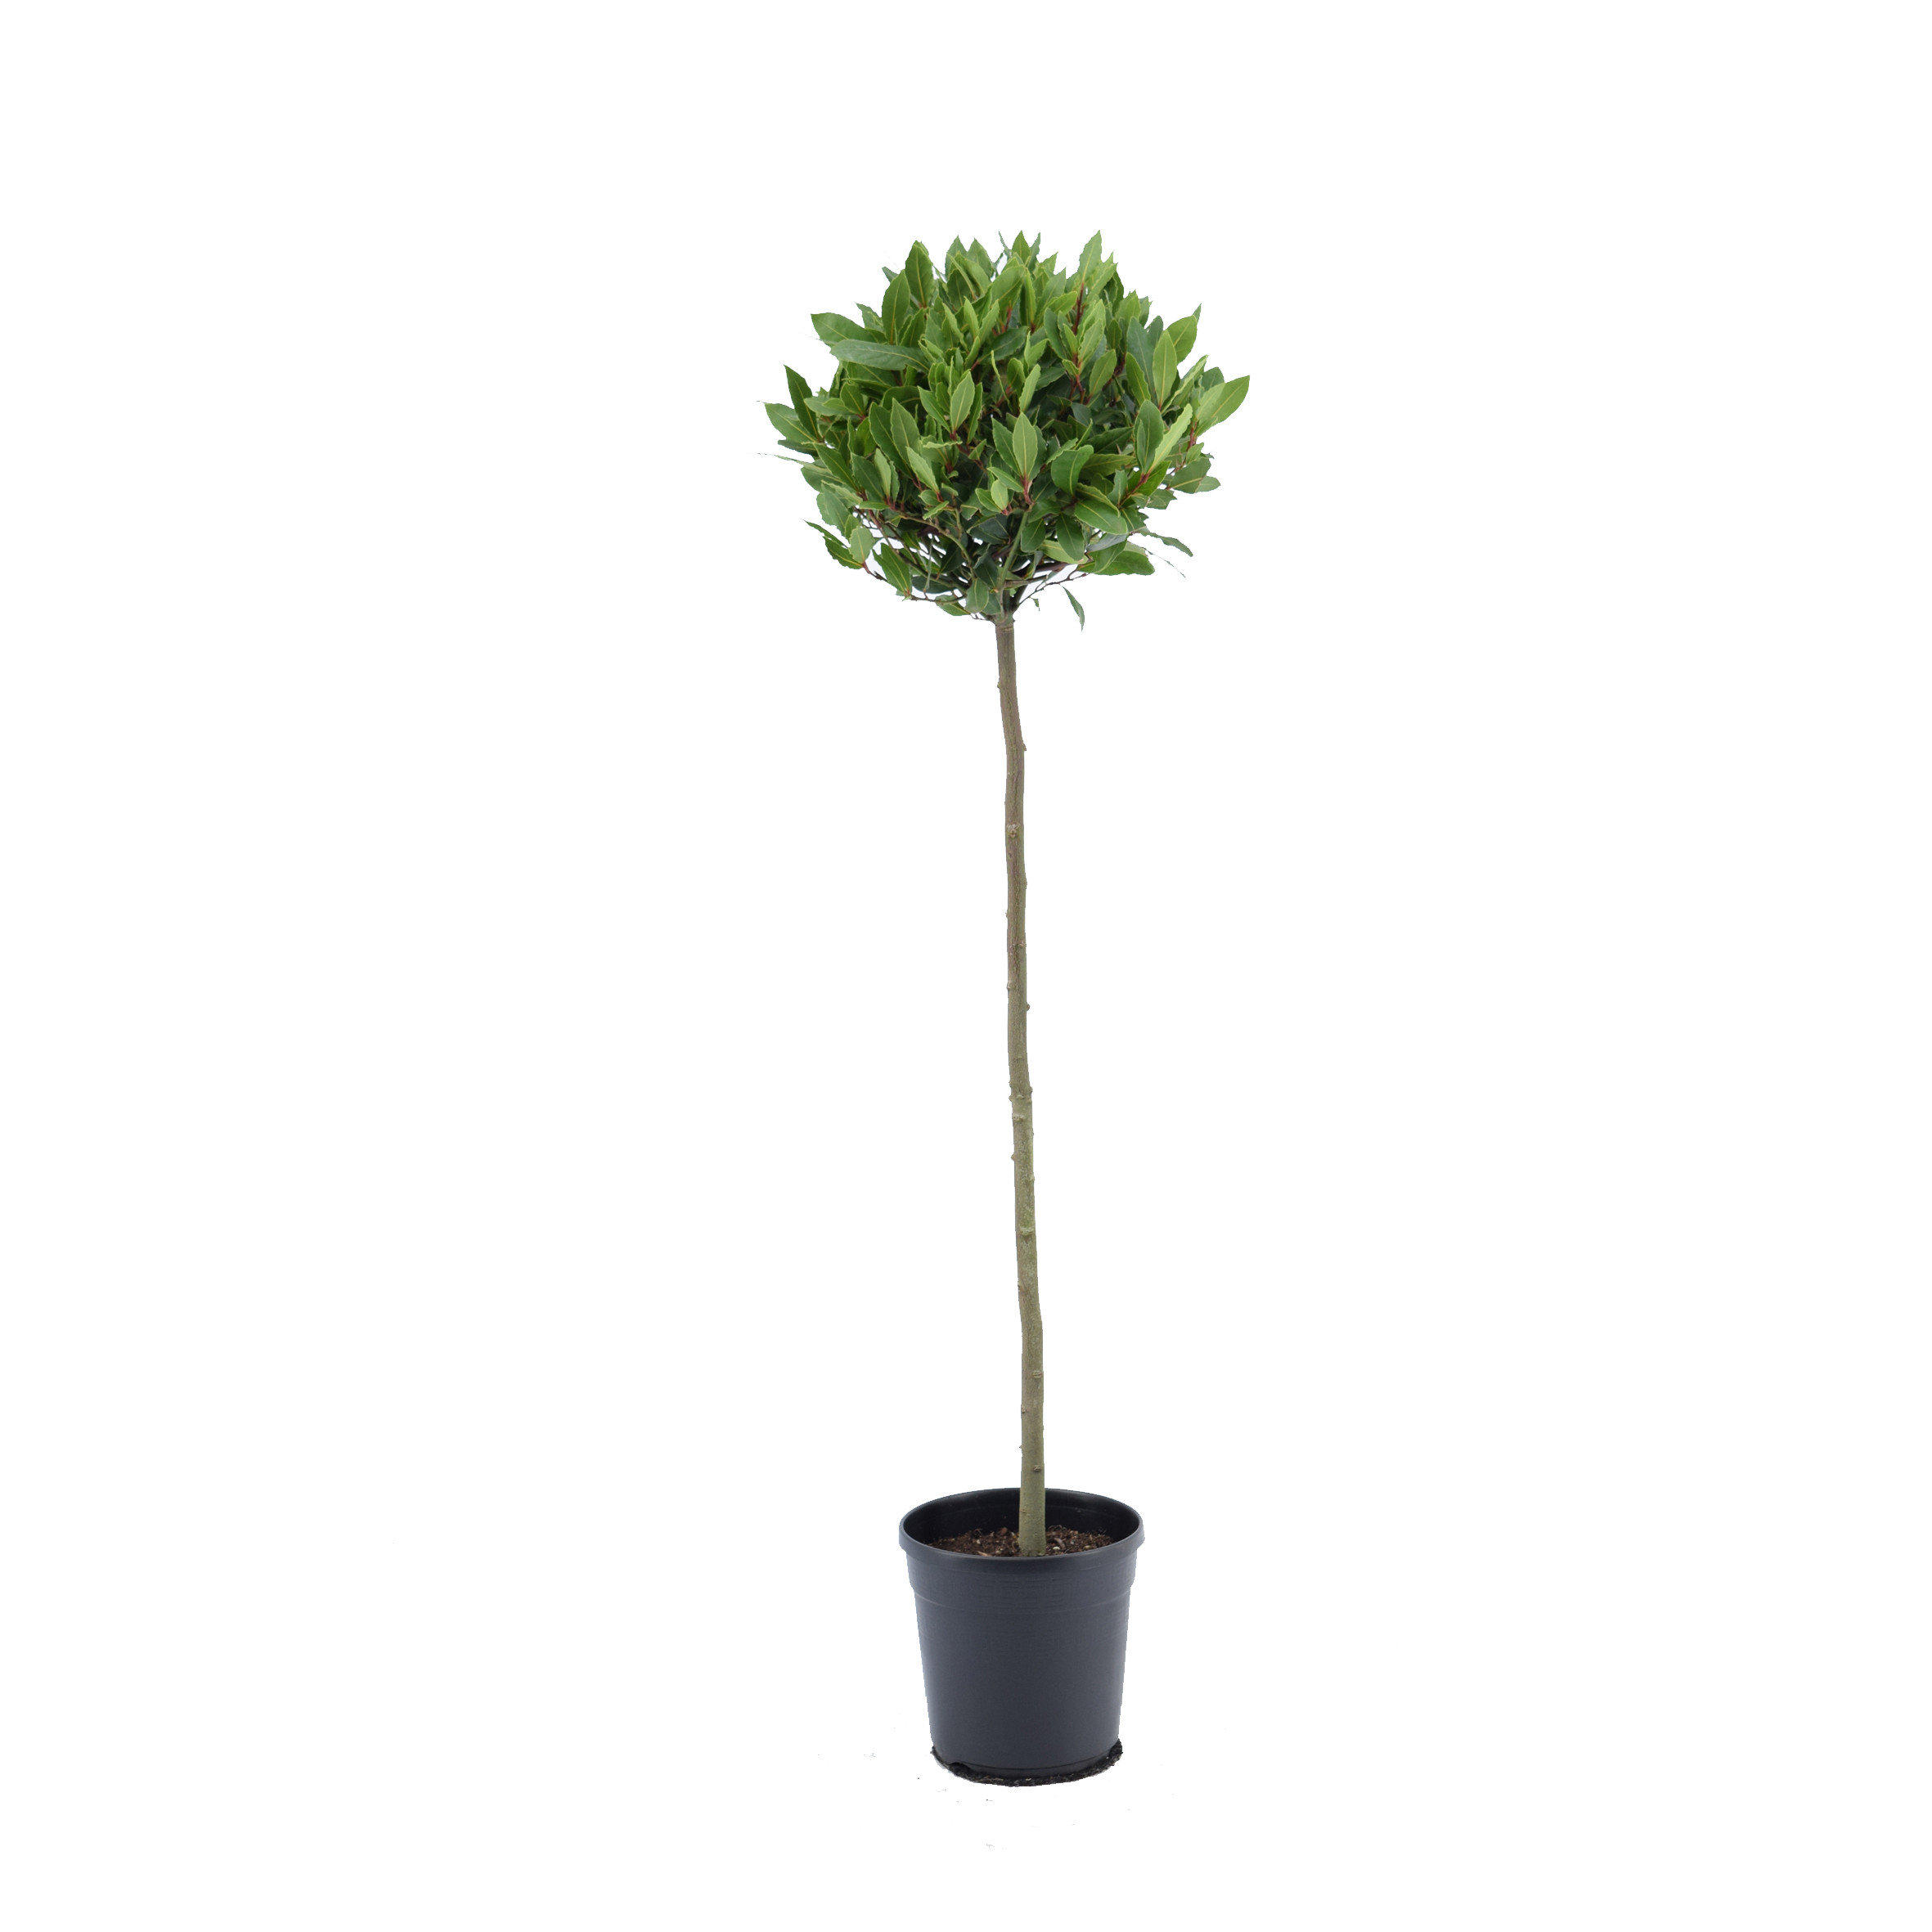 Bay Tree Laurus Nobilis Ball on Stem, Total height 110cm including pot height (head dia 30-35cm) - DELIVERY AUGUST 2024